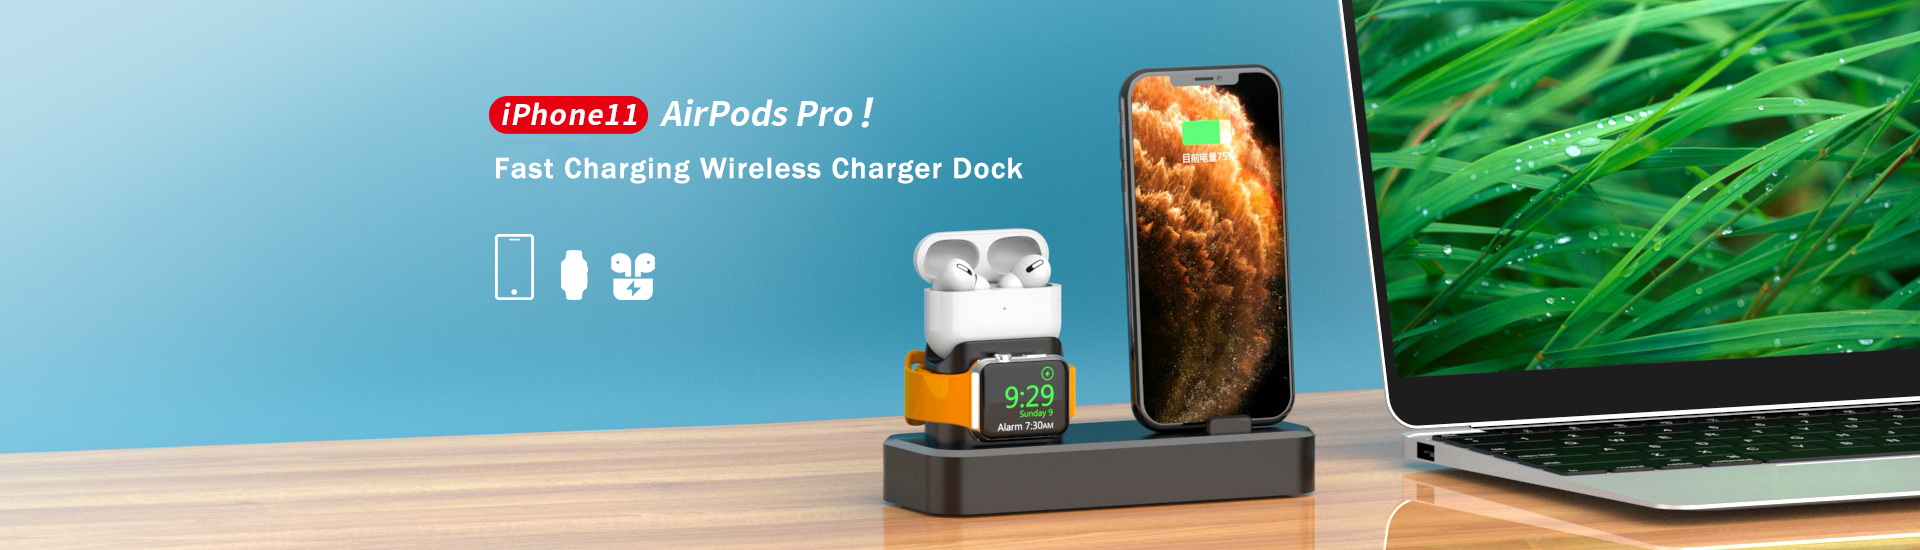 AODUKE-3-in-1-Support-18W-Type-C-to-Lightning-Qi-Fast-Charging-Wireless-Charger-Dock-Stand-for-iPhon-1737448-1